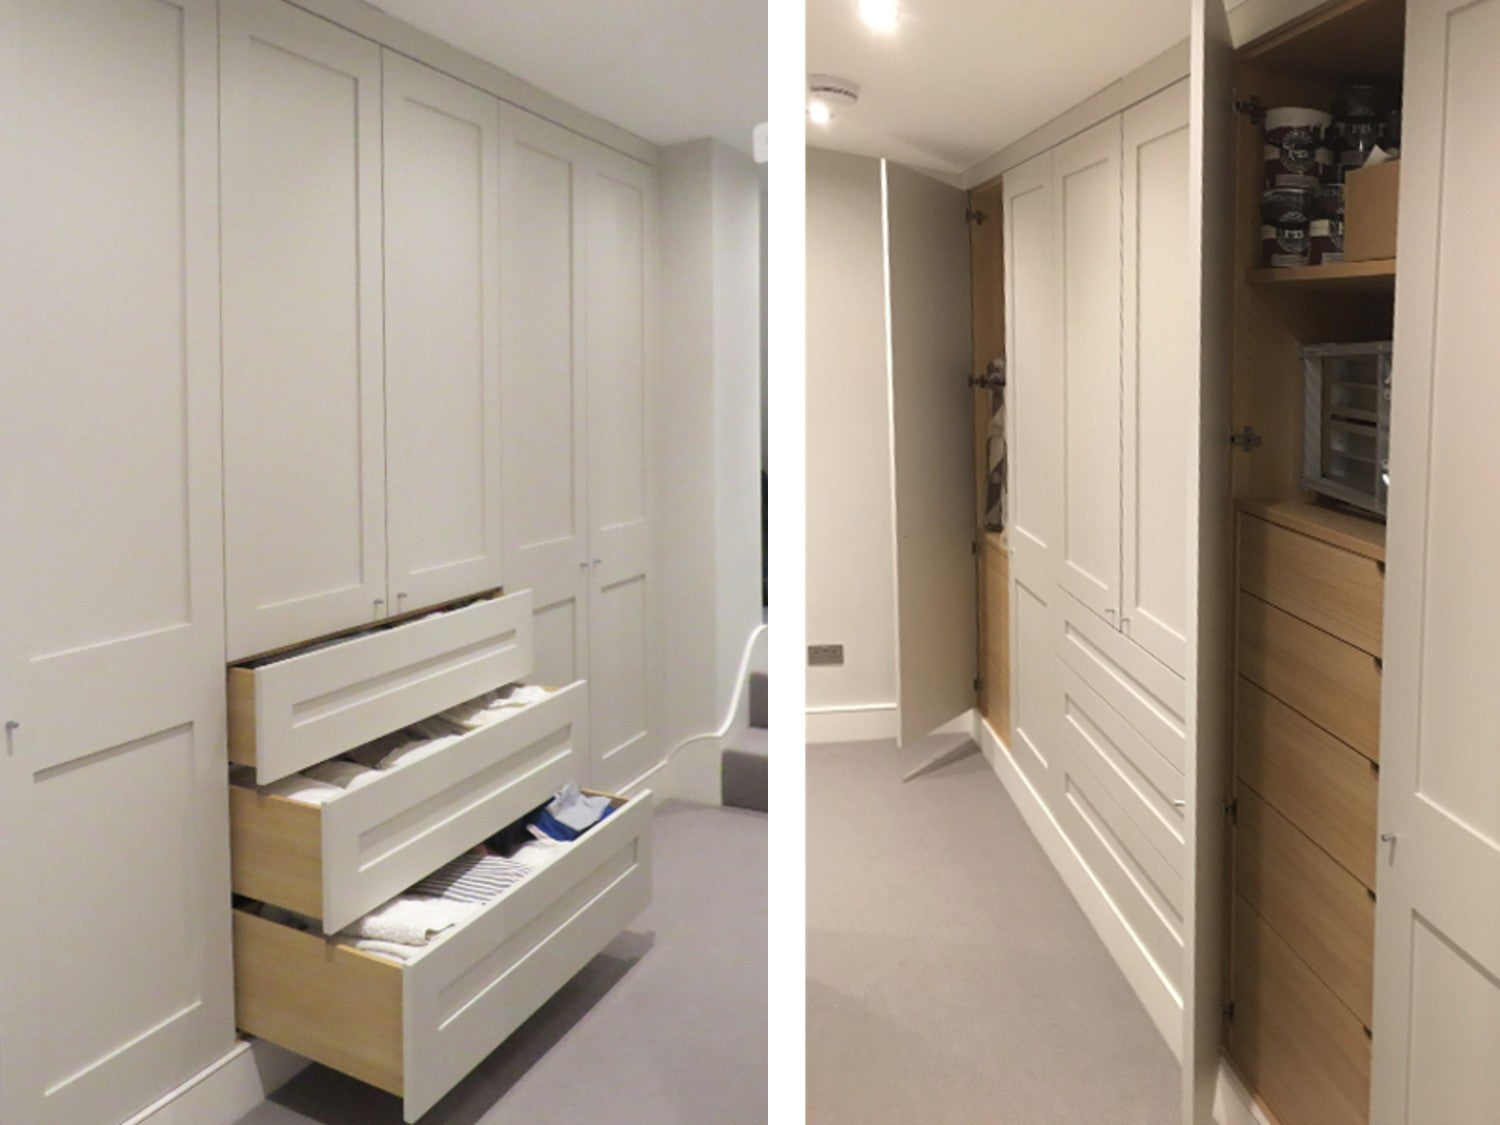 Fitted storage cupboards